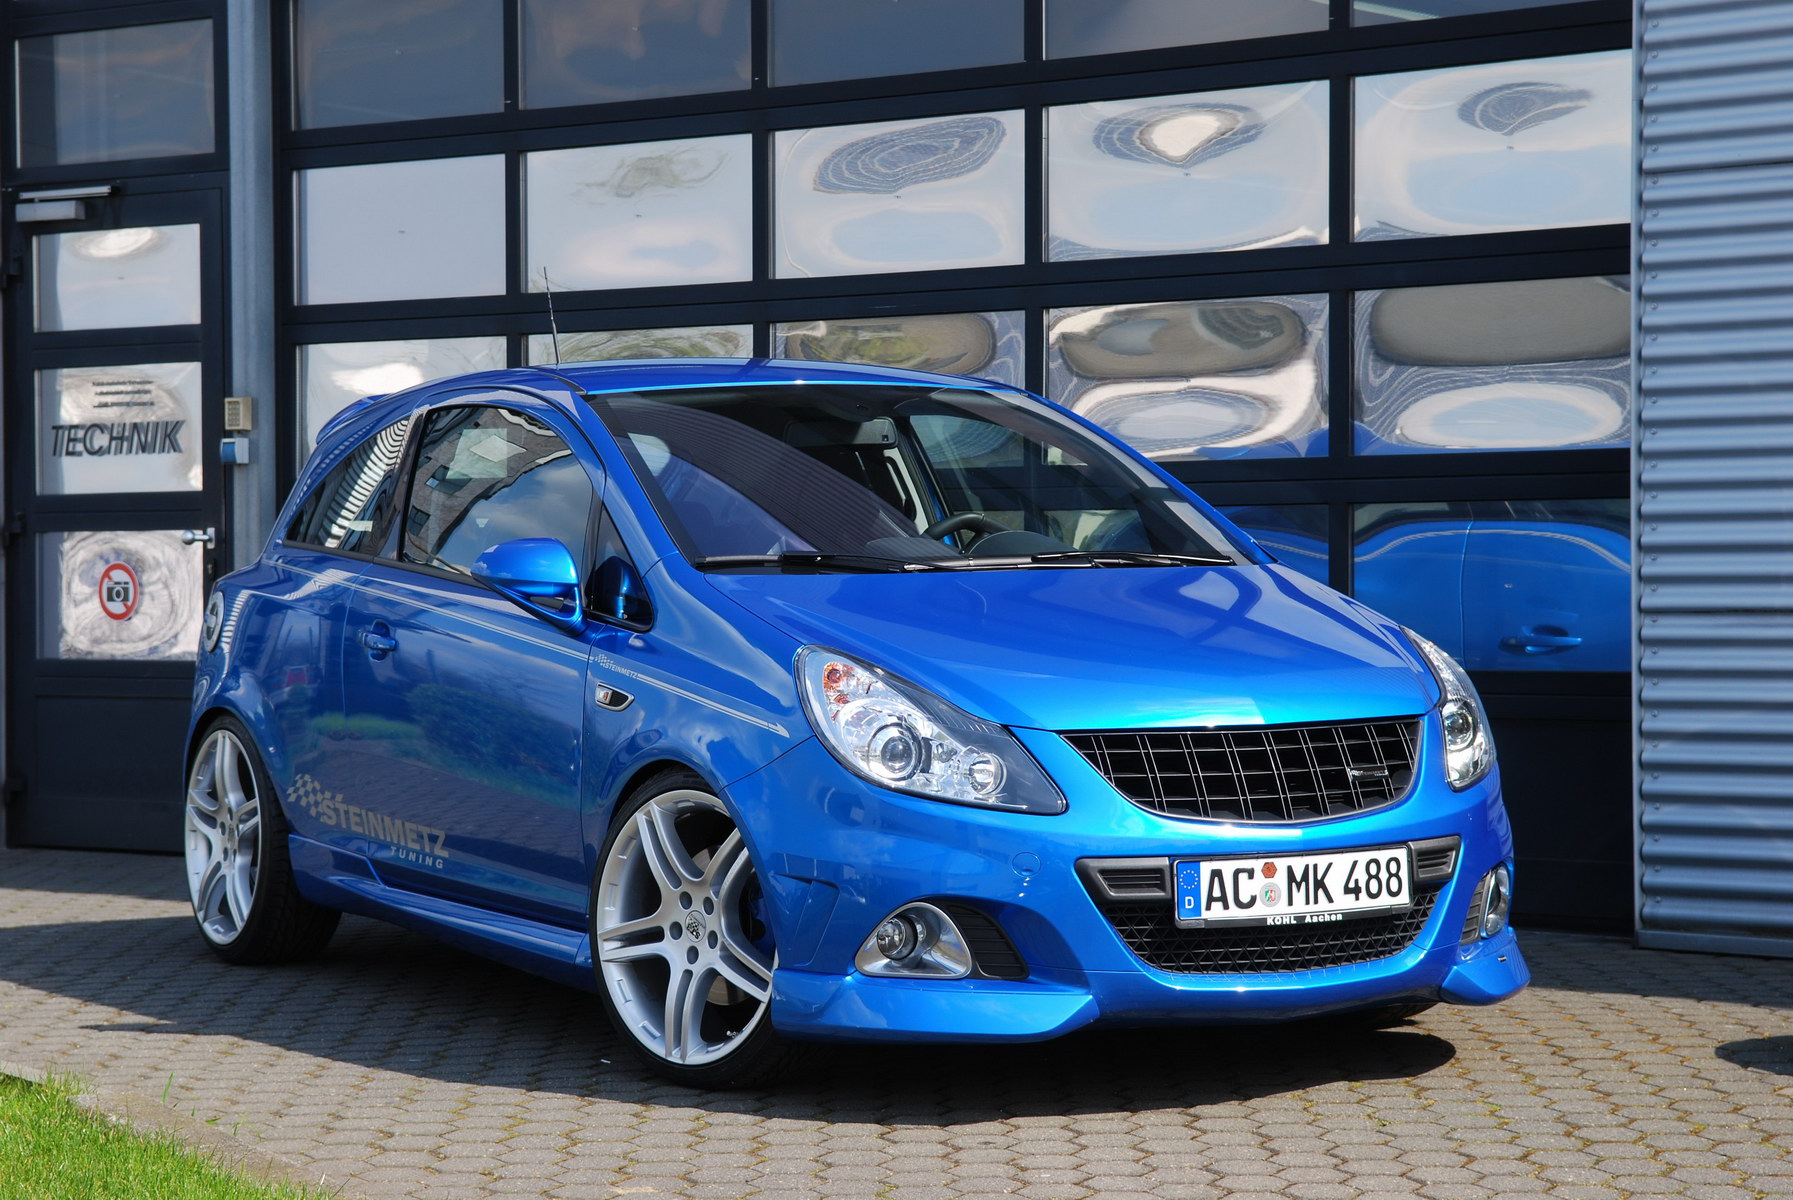 Opel Corsa OPC. View Download Wallpaper. 1793x1200. Comments